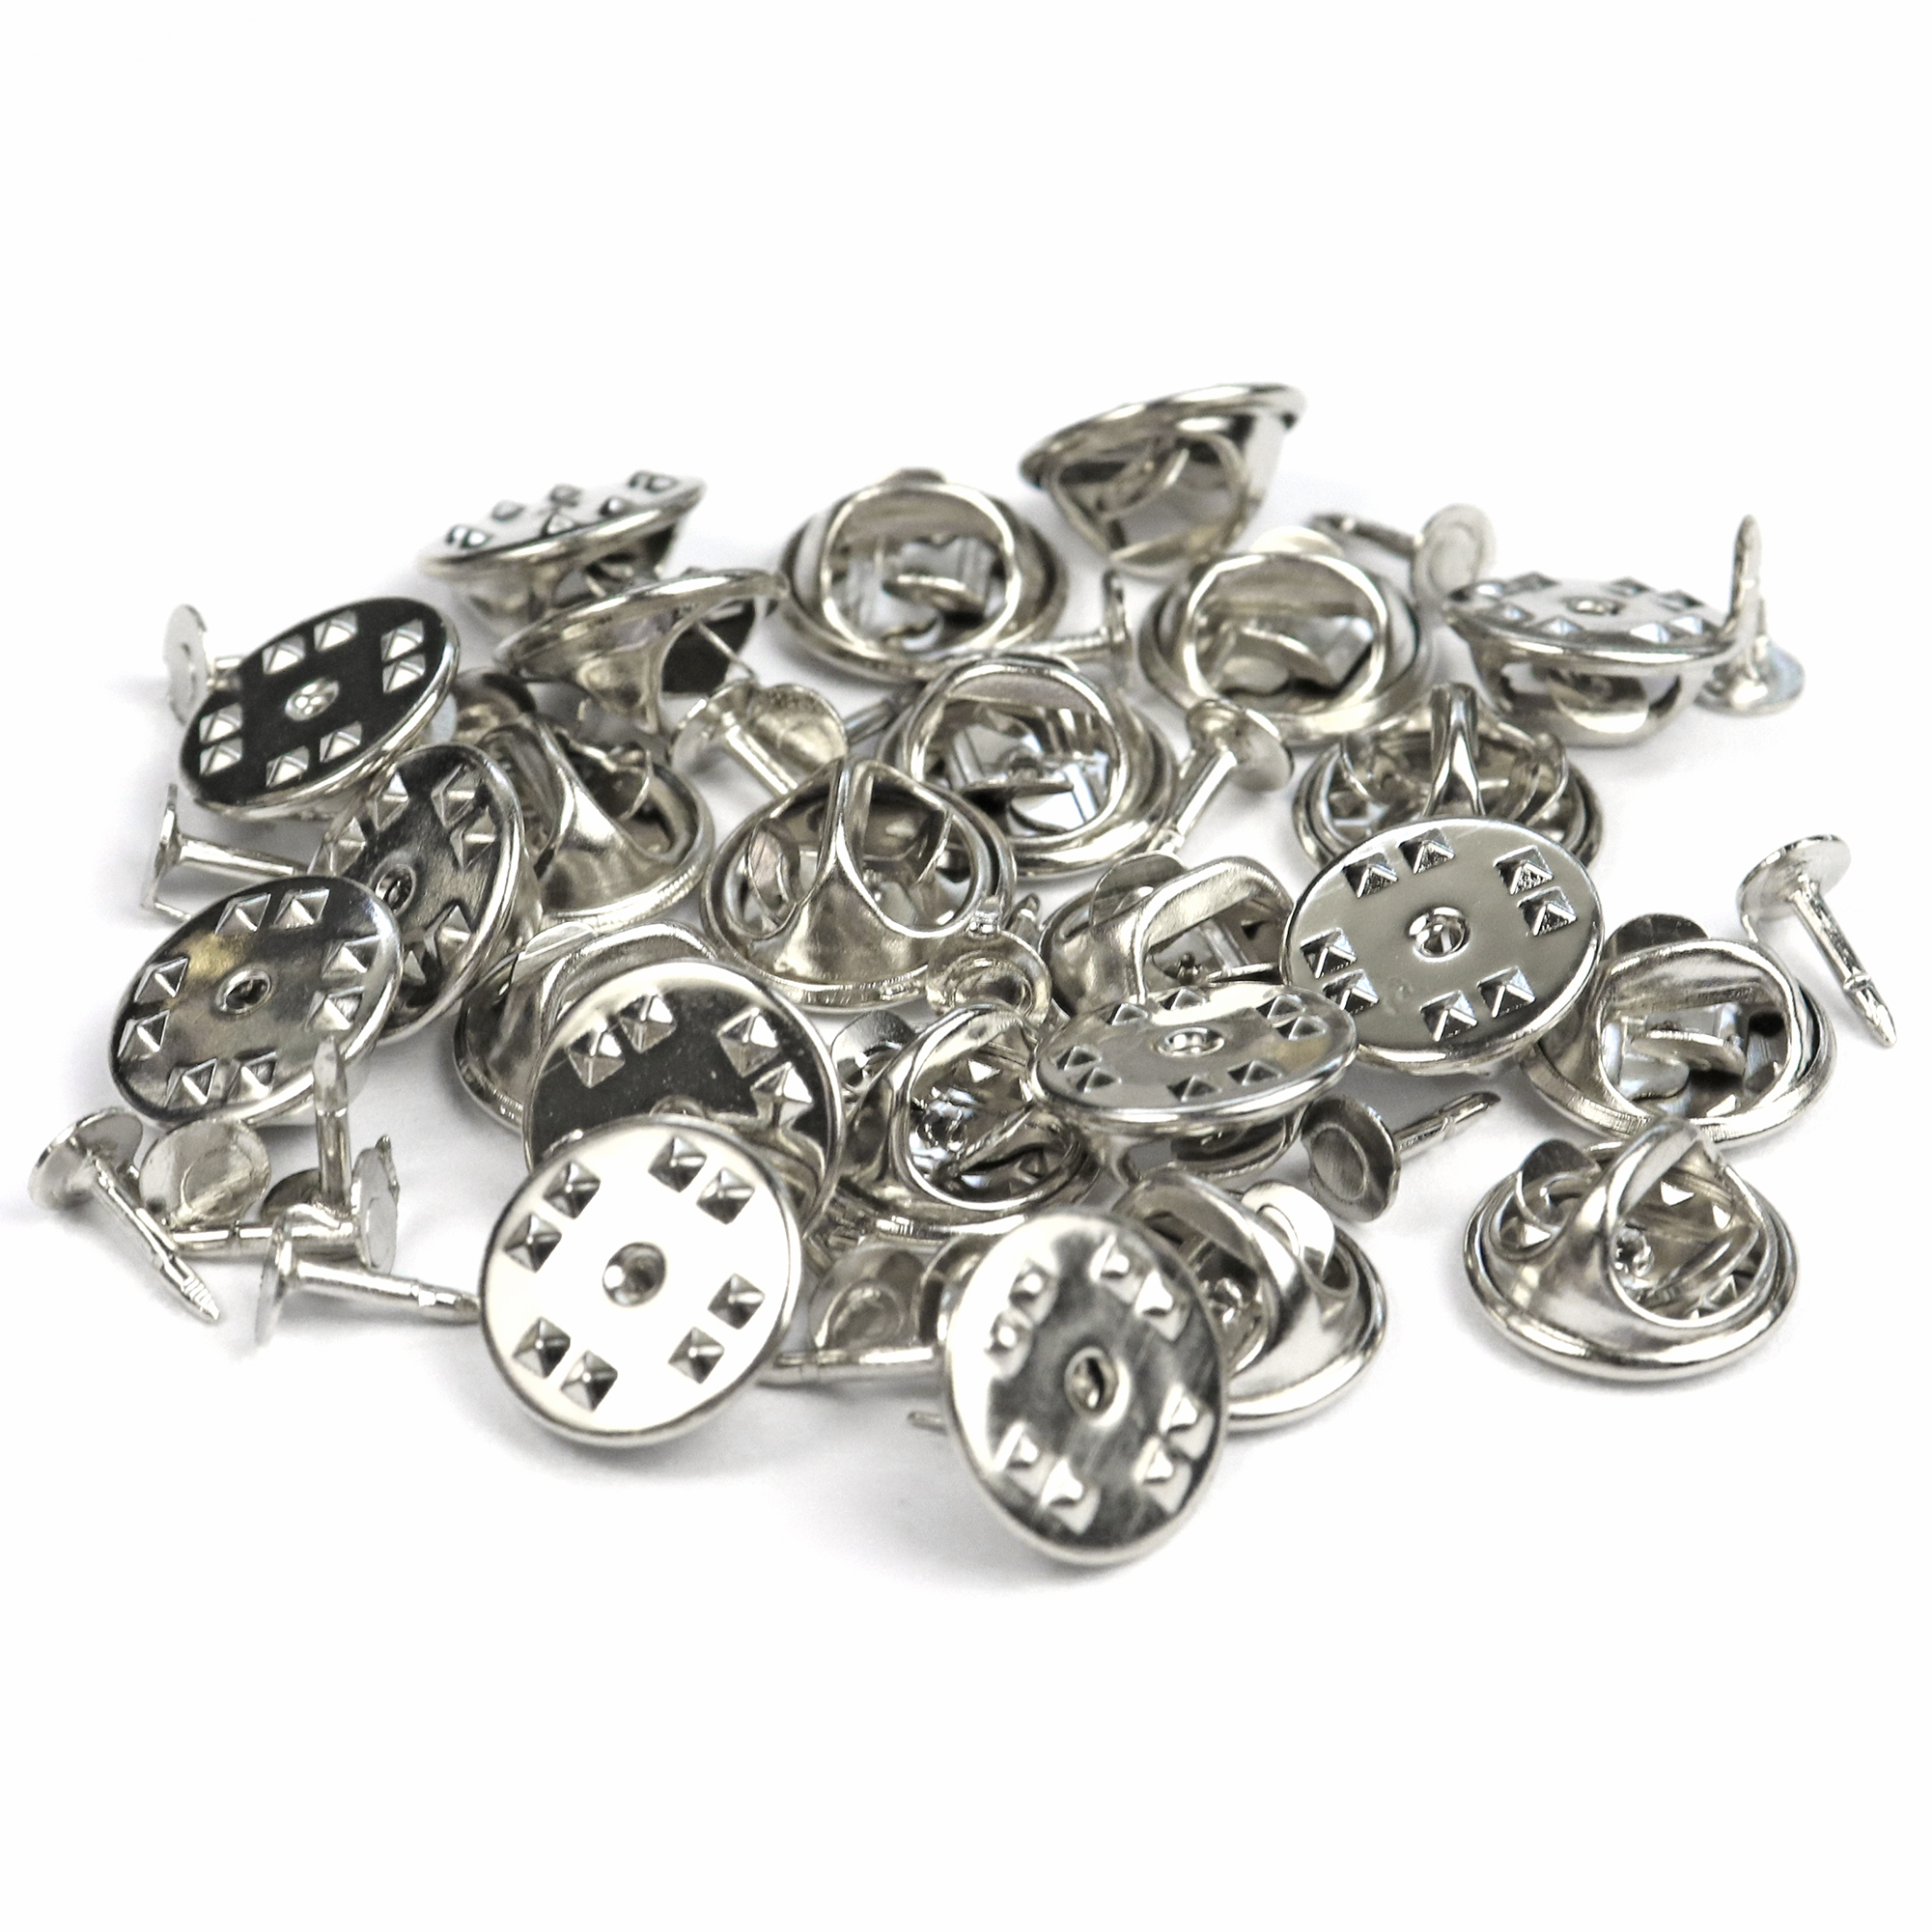 LEISIWEI 100pcs Metal Locking Pin Backs Lapel Pin Clutch Back Scatter Butterfly Clutch Squeeze Badge Holder Jewelry Findings Pin Back